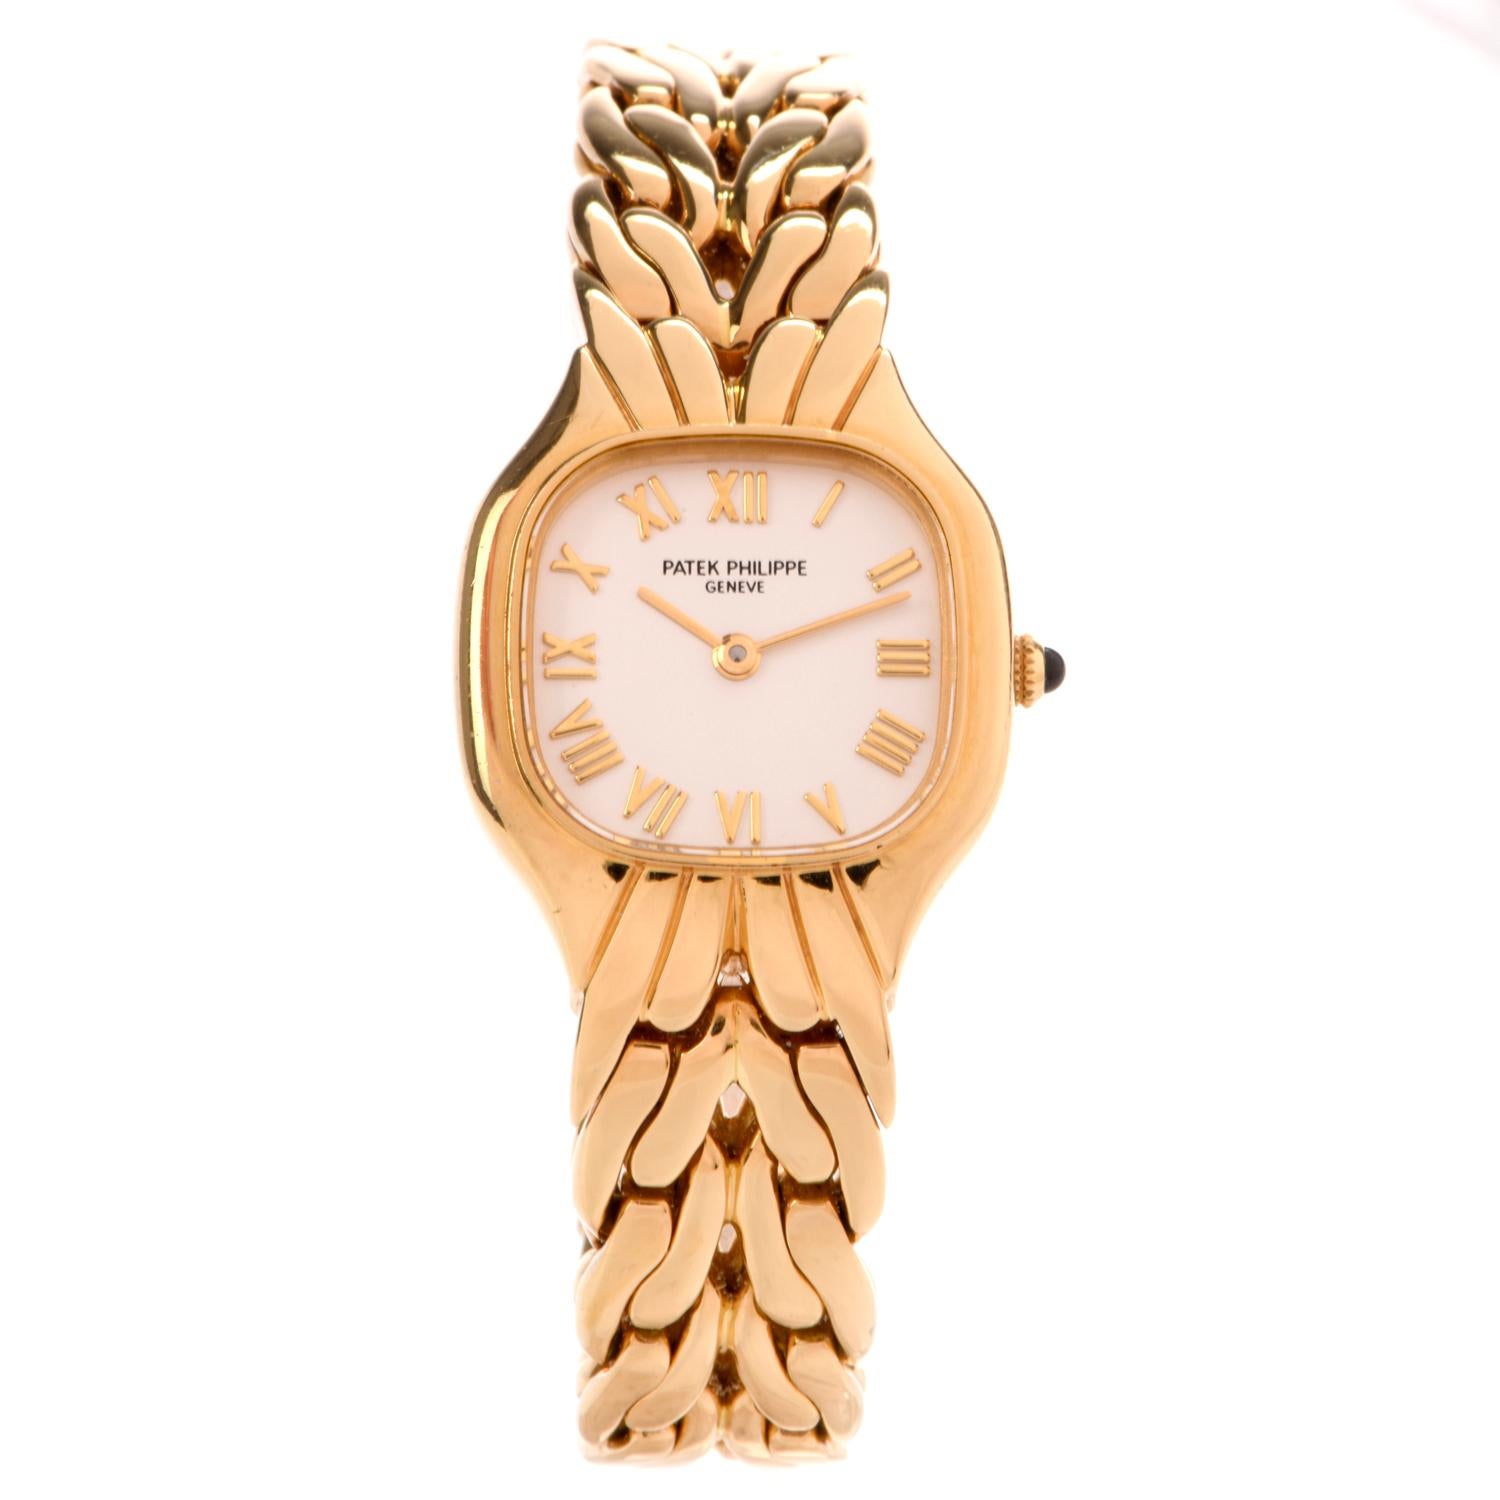 in Pristine condition Preowned Ladies Patek Philippe Model 4816 LaFlamme Watch crafted in luxurious 18K gold. 

White ivory Dial with gold markers and hands.  Scratch resistant Sapphire crystal.

Cabachon cut Onlyx crown.  Quartz movement. Beautiful